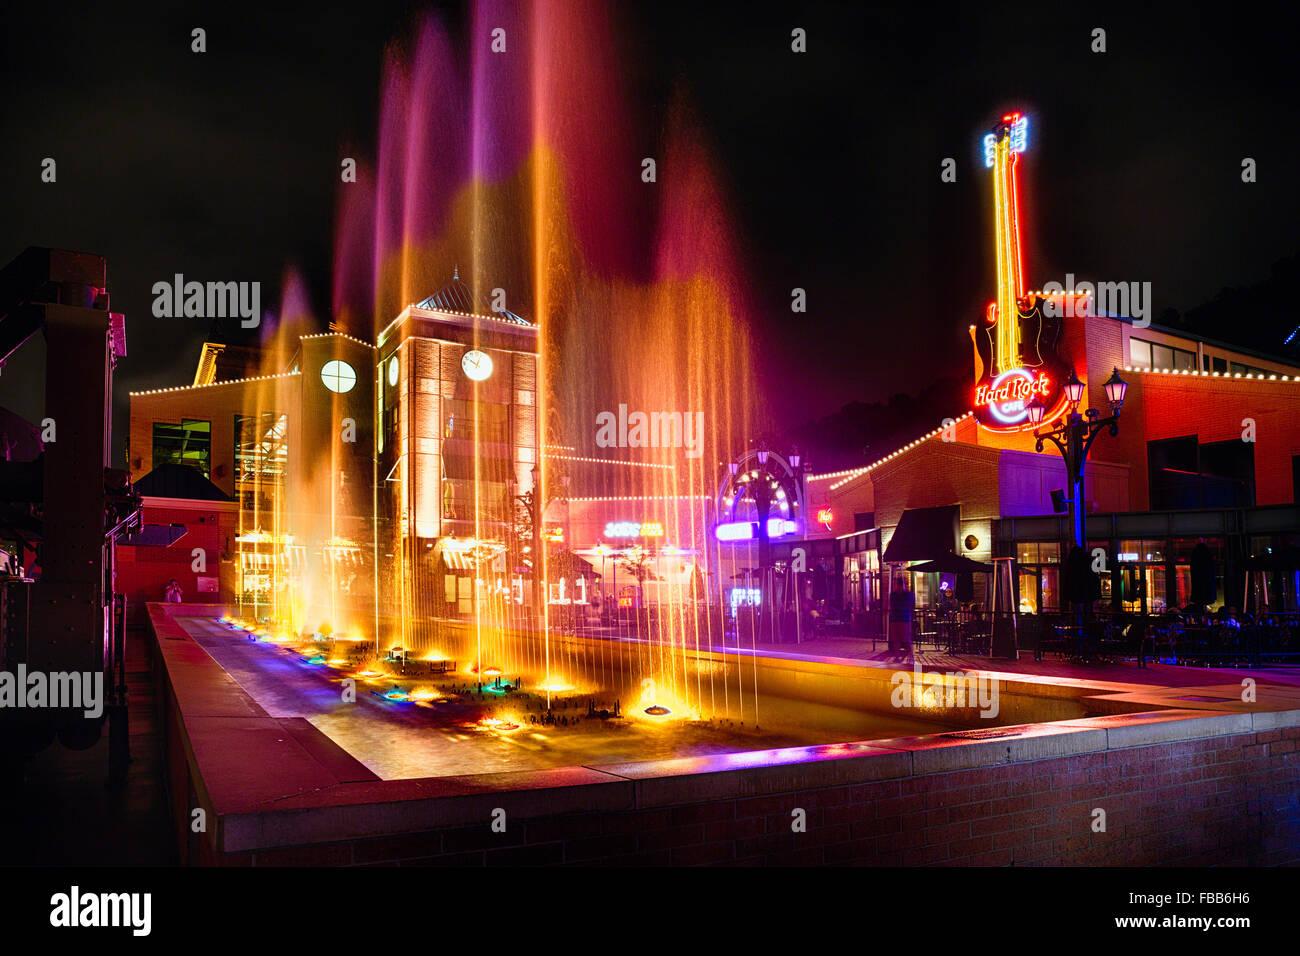 Fountain and Rock and Roll Bar on Station Square Illuminated at Night, Pittsburgh, Pennsylvania Stock Photo